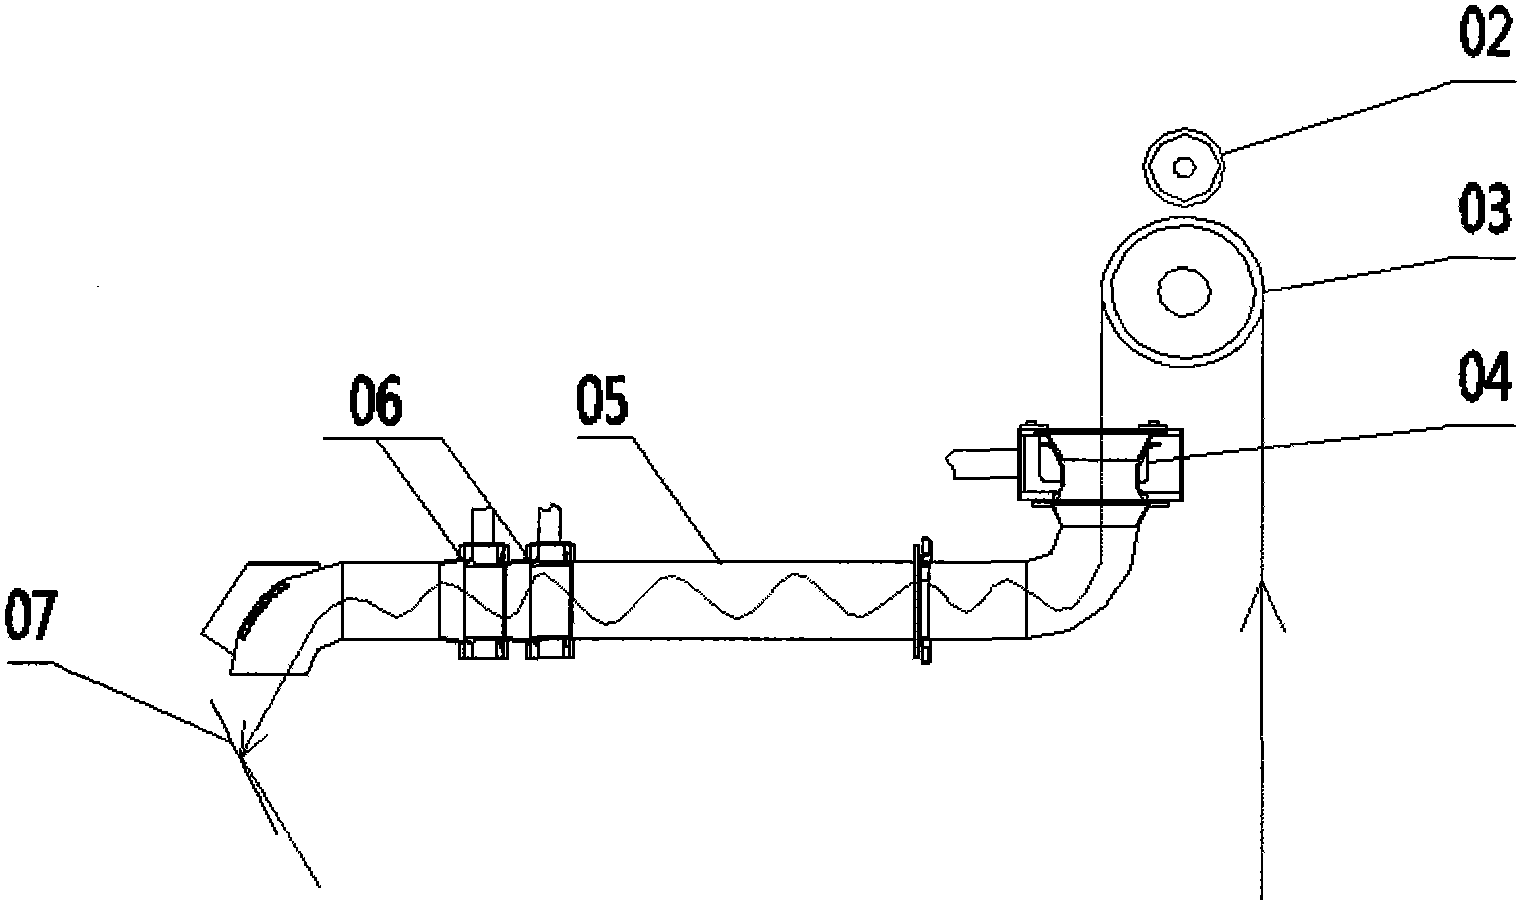 Continuous rope-shaped jet washing machine